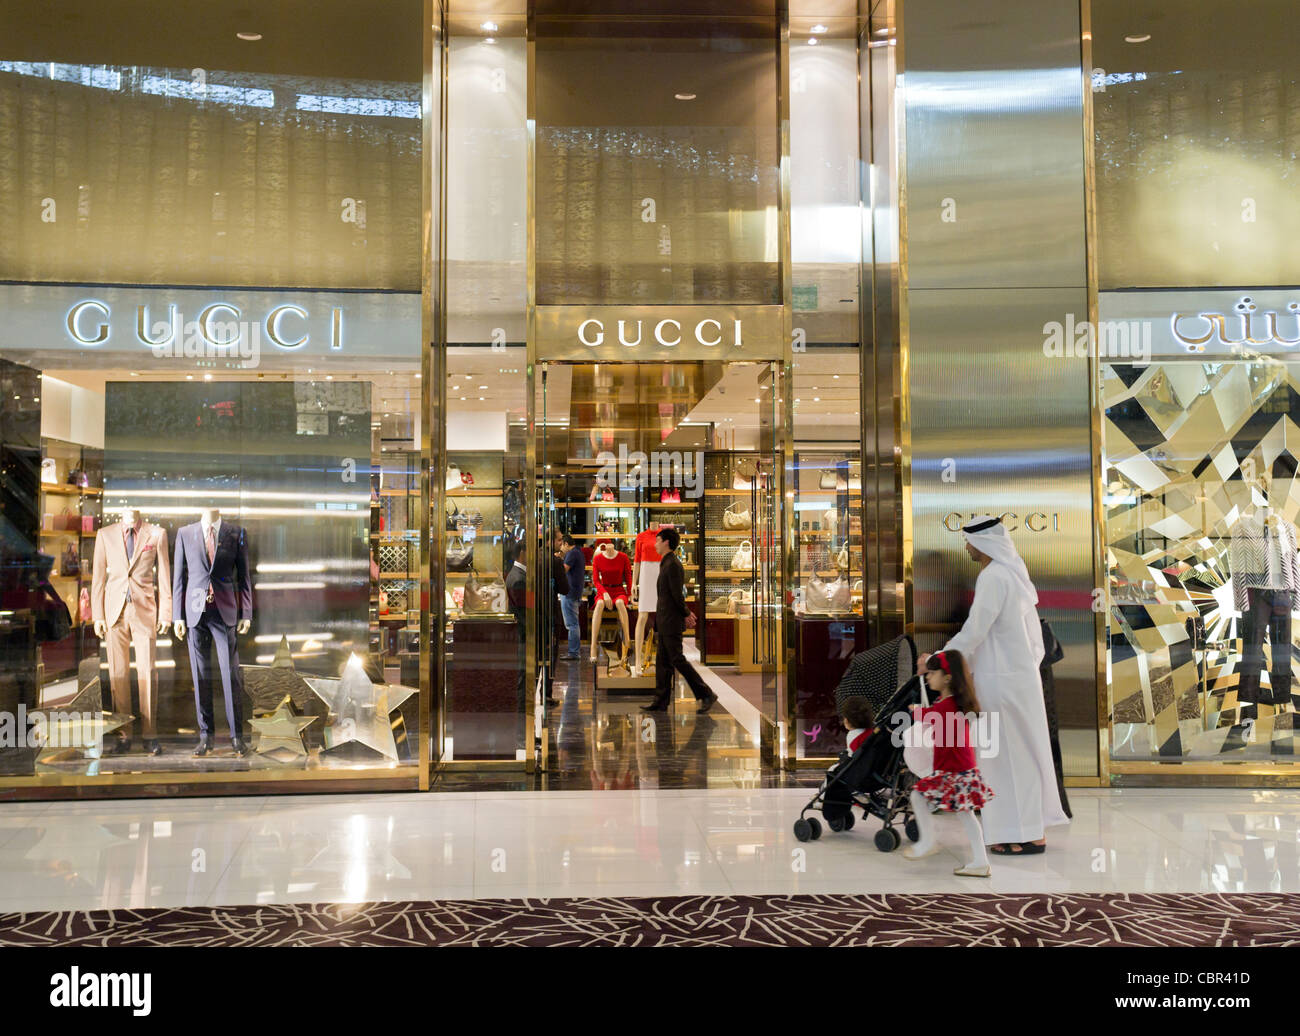 Gucci - Boutique in Orchard Road